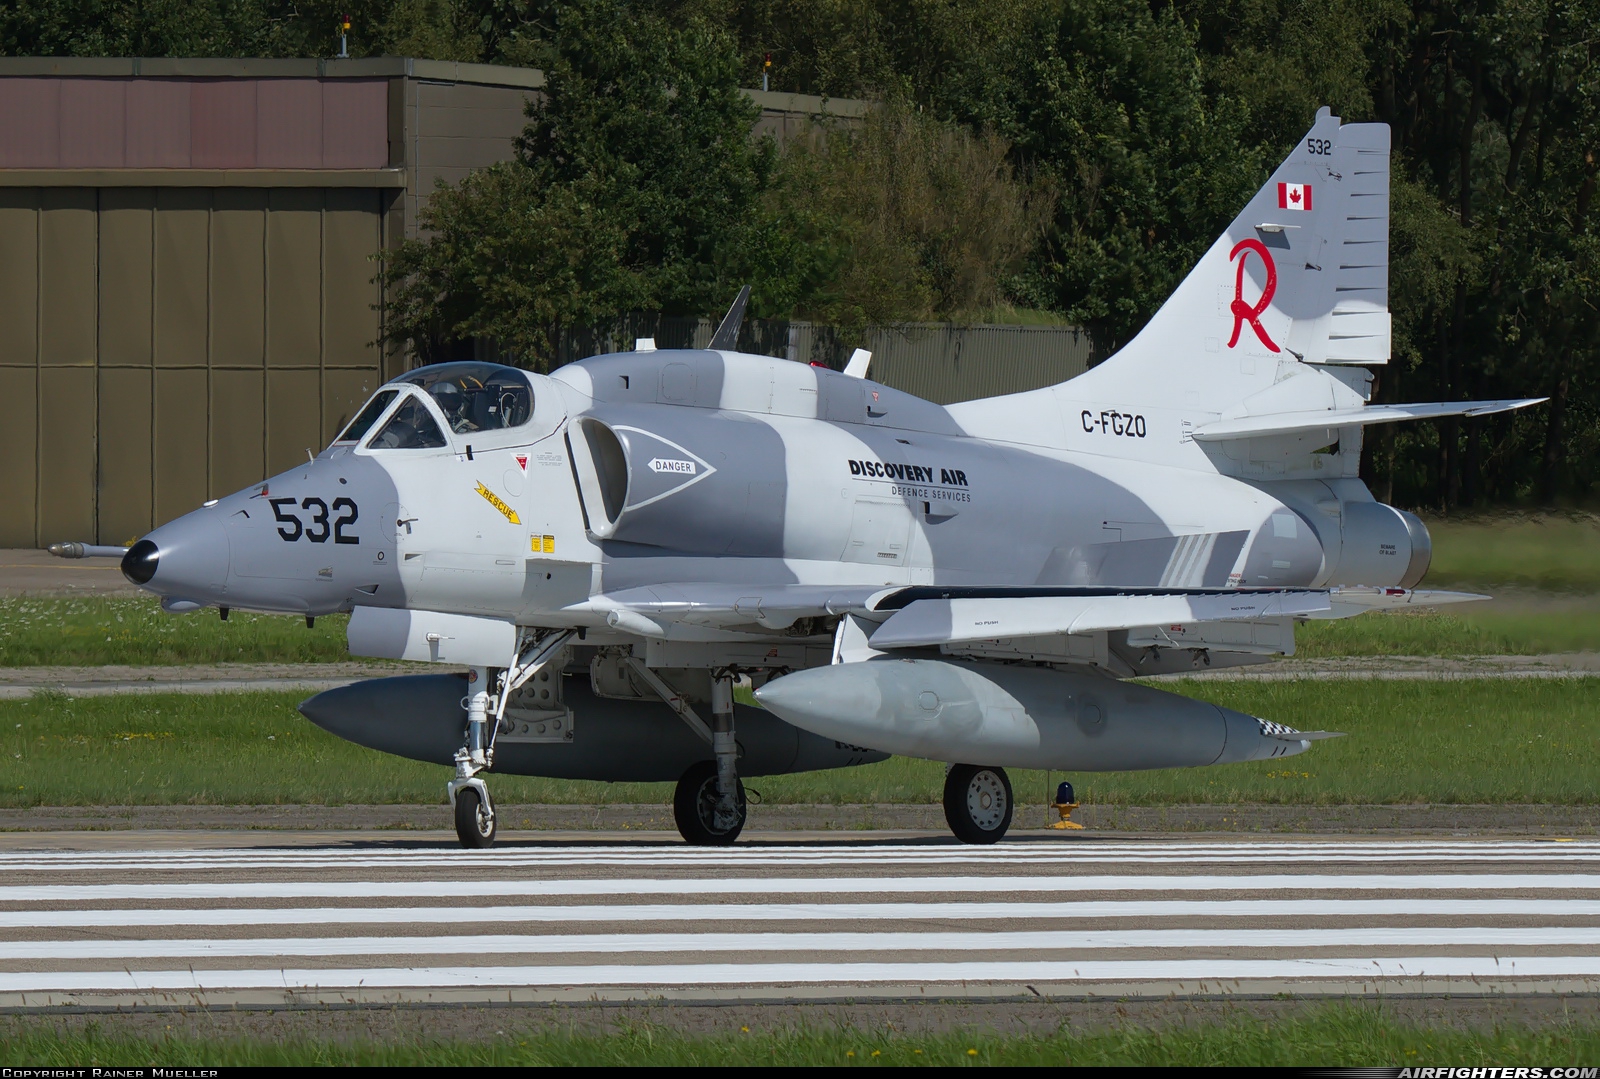 Company Owned - Discovery Air Defence Services Douglas A-4N Skyhawk C-FGZO at Wittmundhafen (Wittmund) (ETNT), Germany